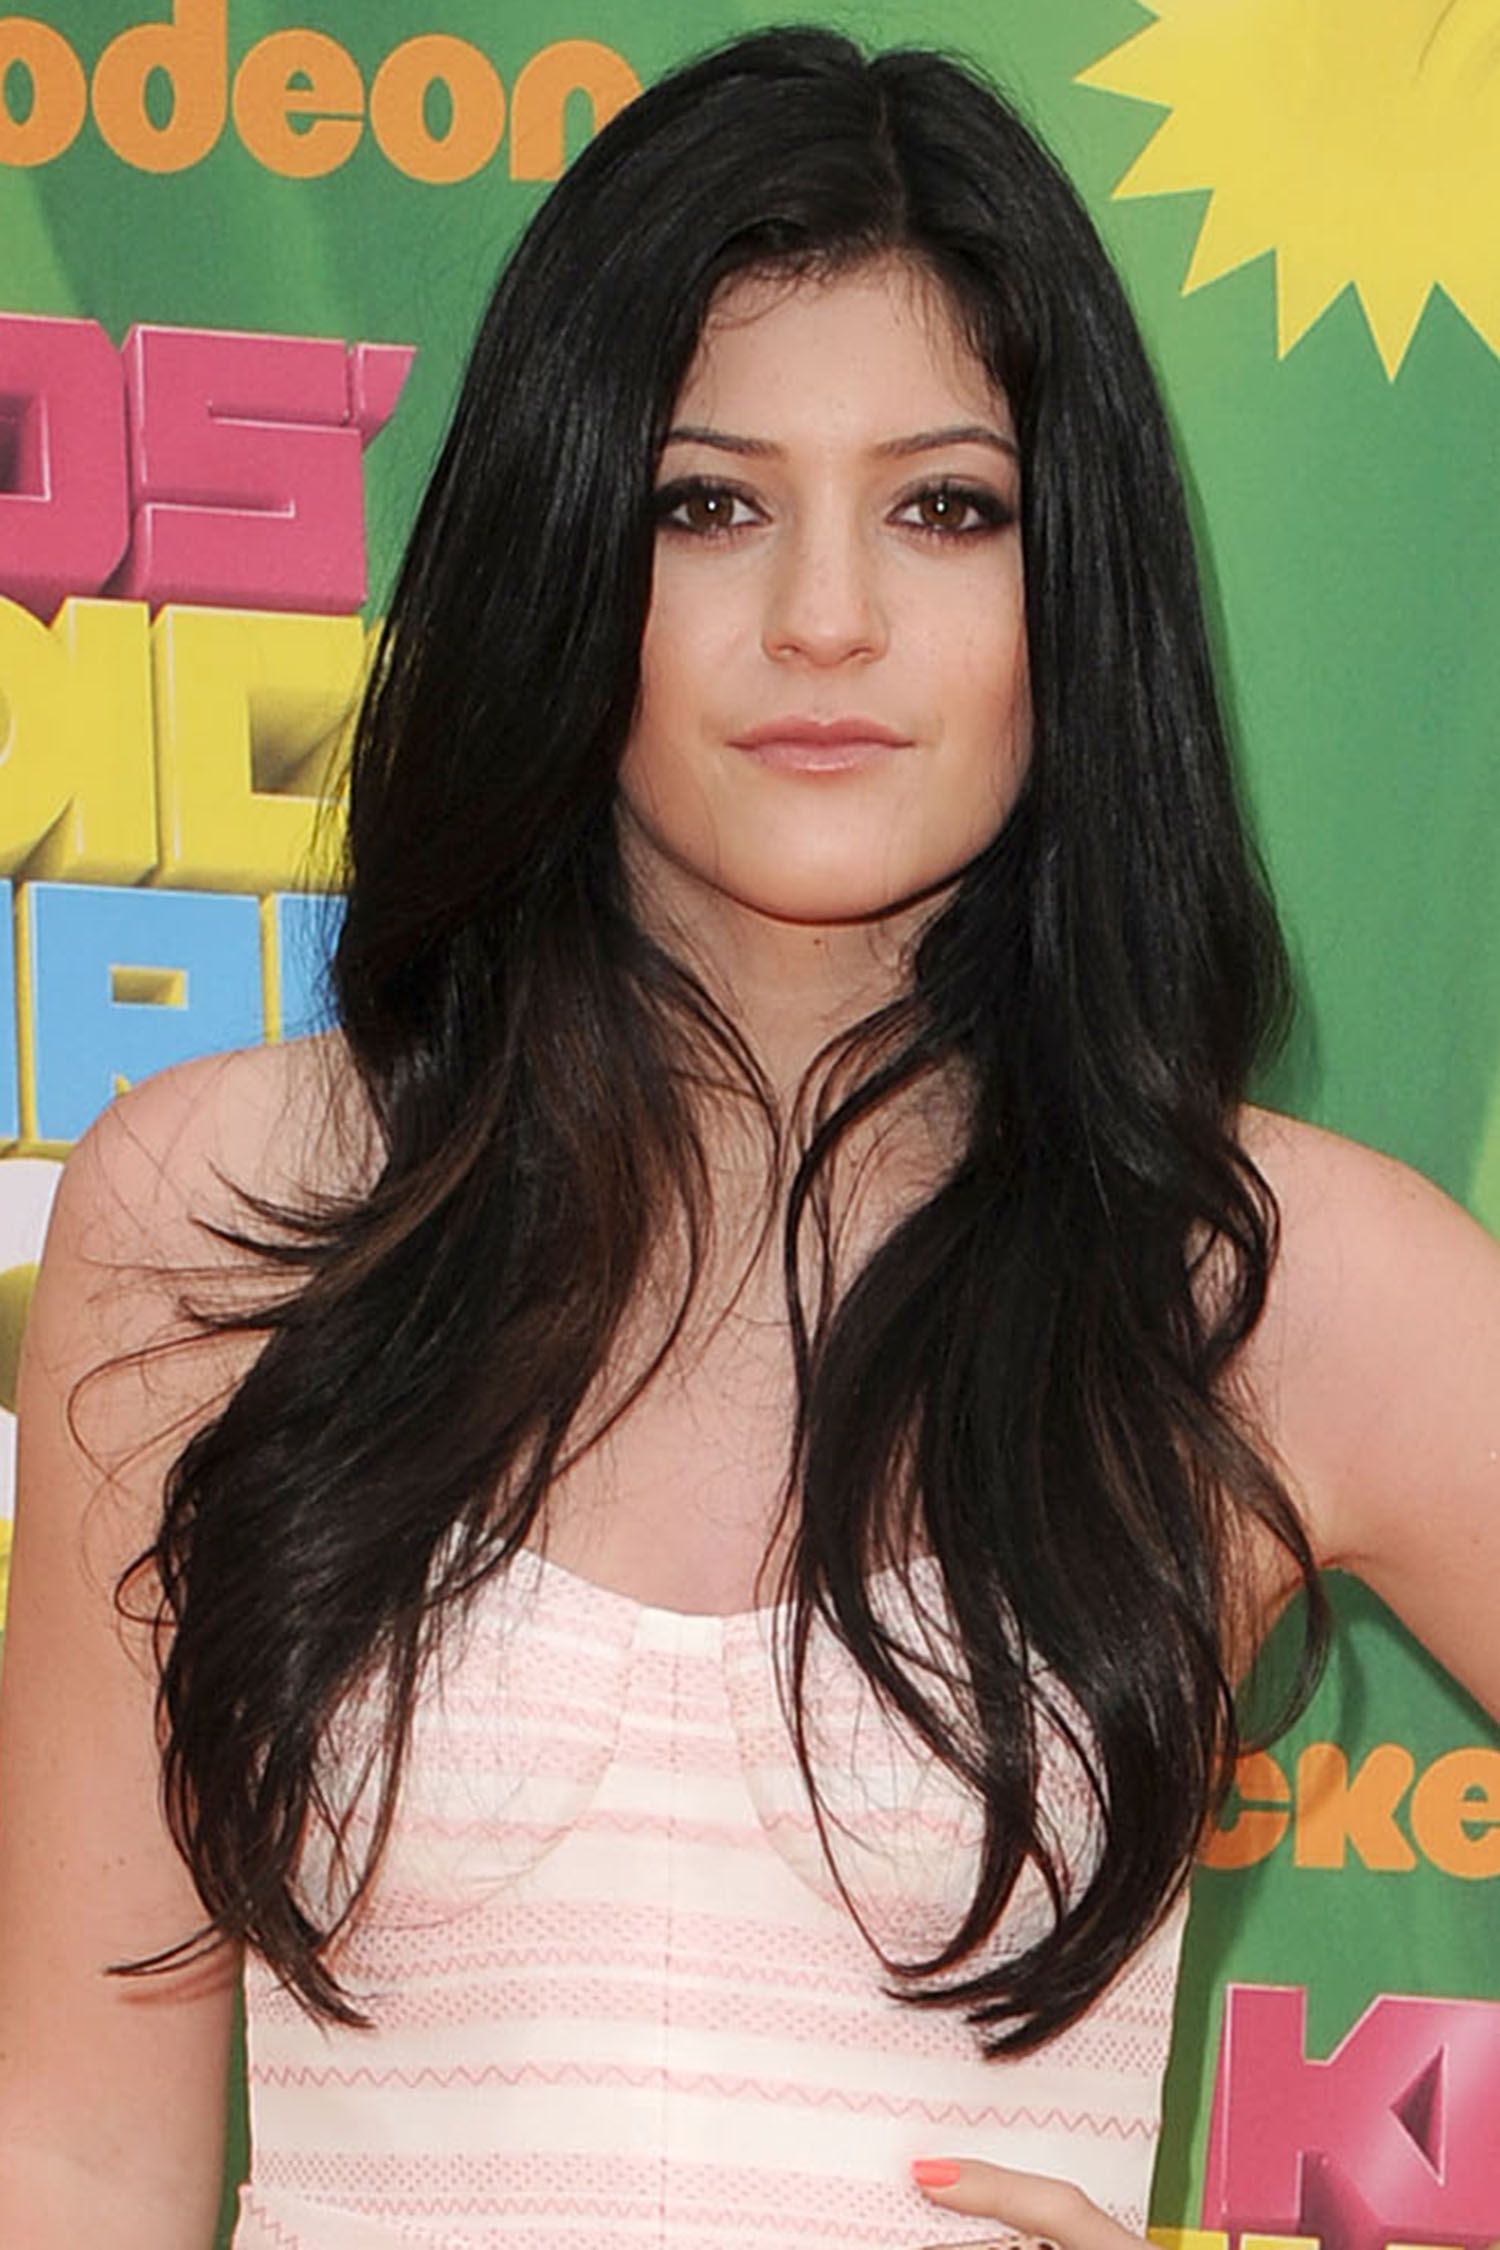 Kylie Jenner S Beauty Transformation Through The Years Kylie Jenner Makeup